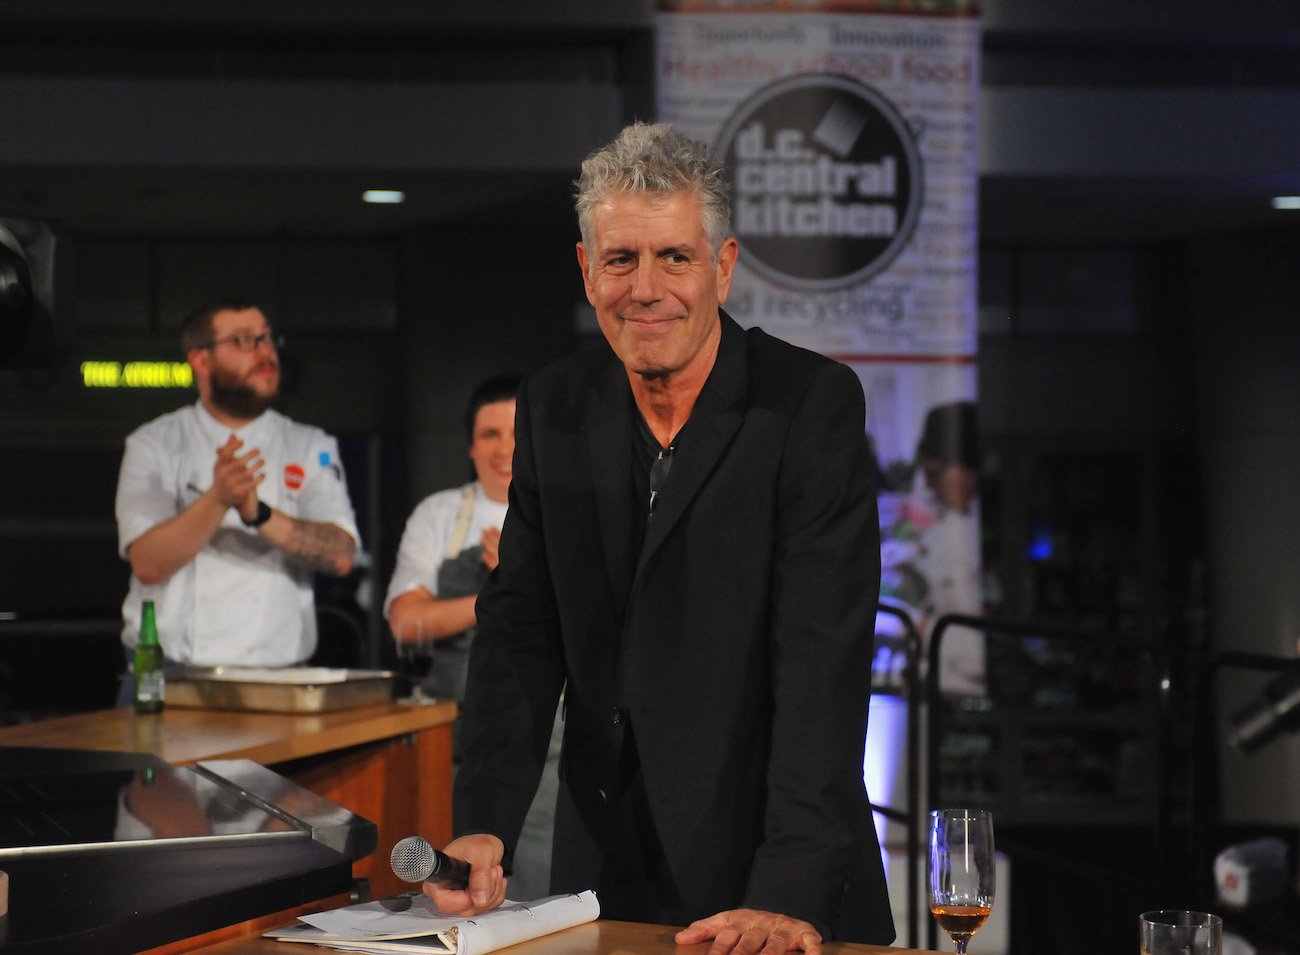 Anthony Bourdain smirks as he wears a black suit, holds a microphone, and looks on